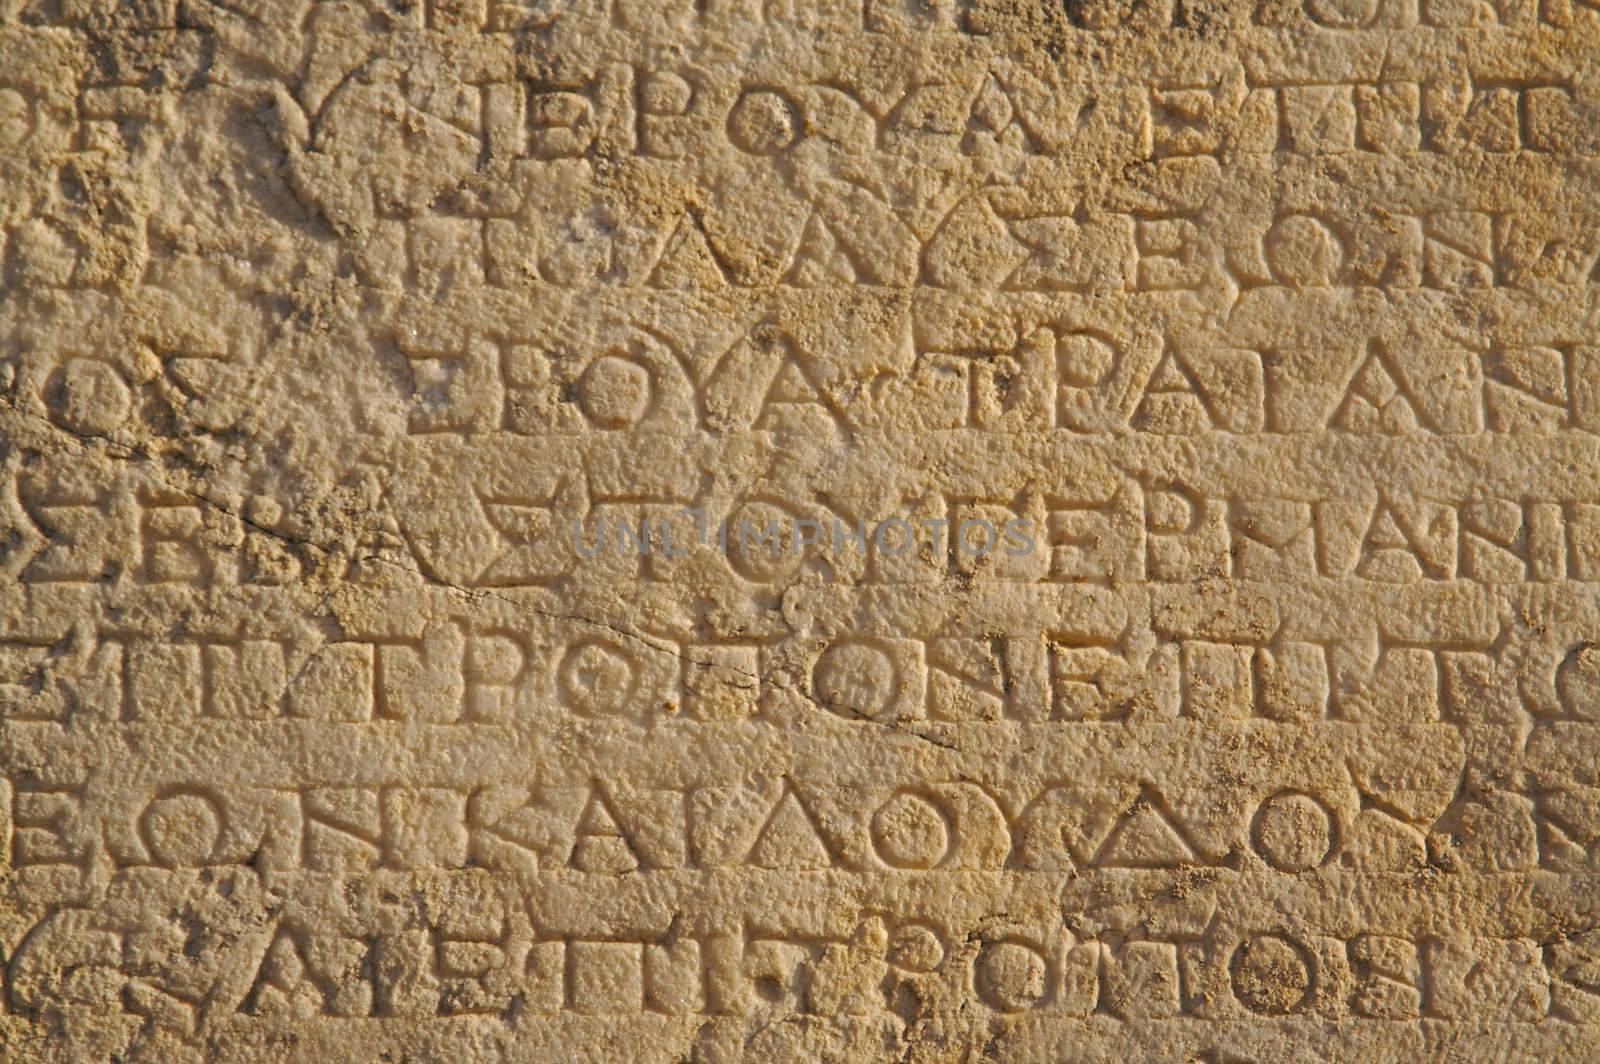 A close up of ancient Greek text. by Feverpitched